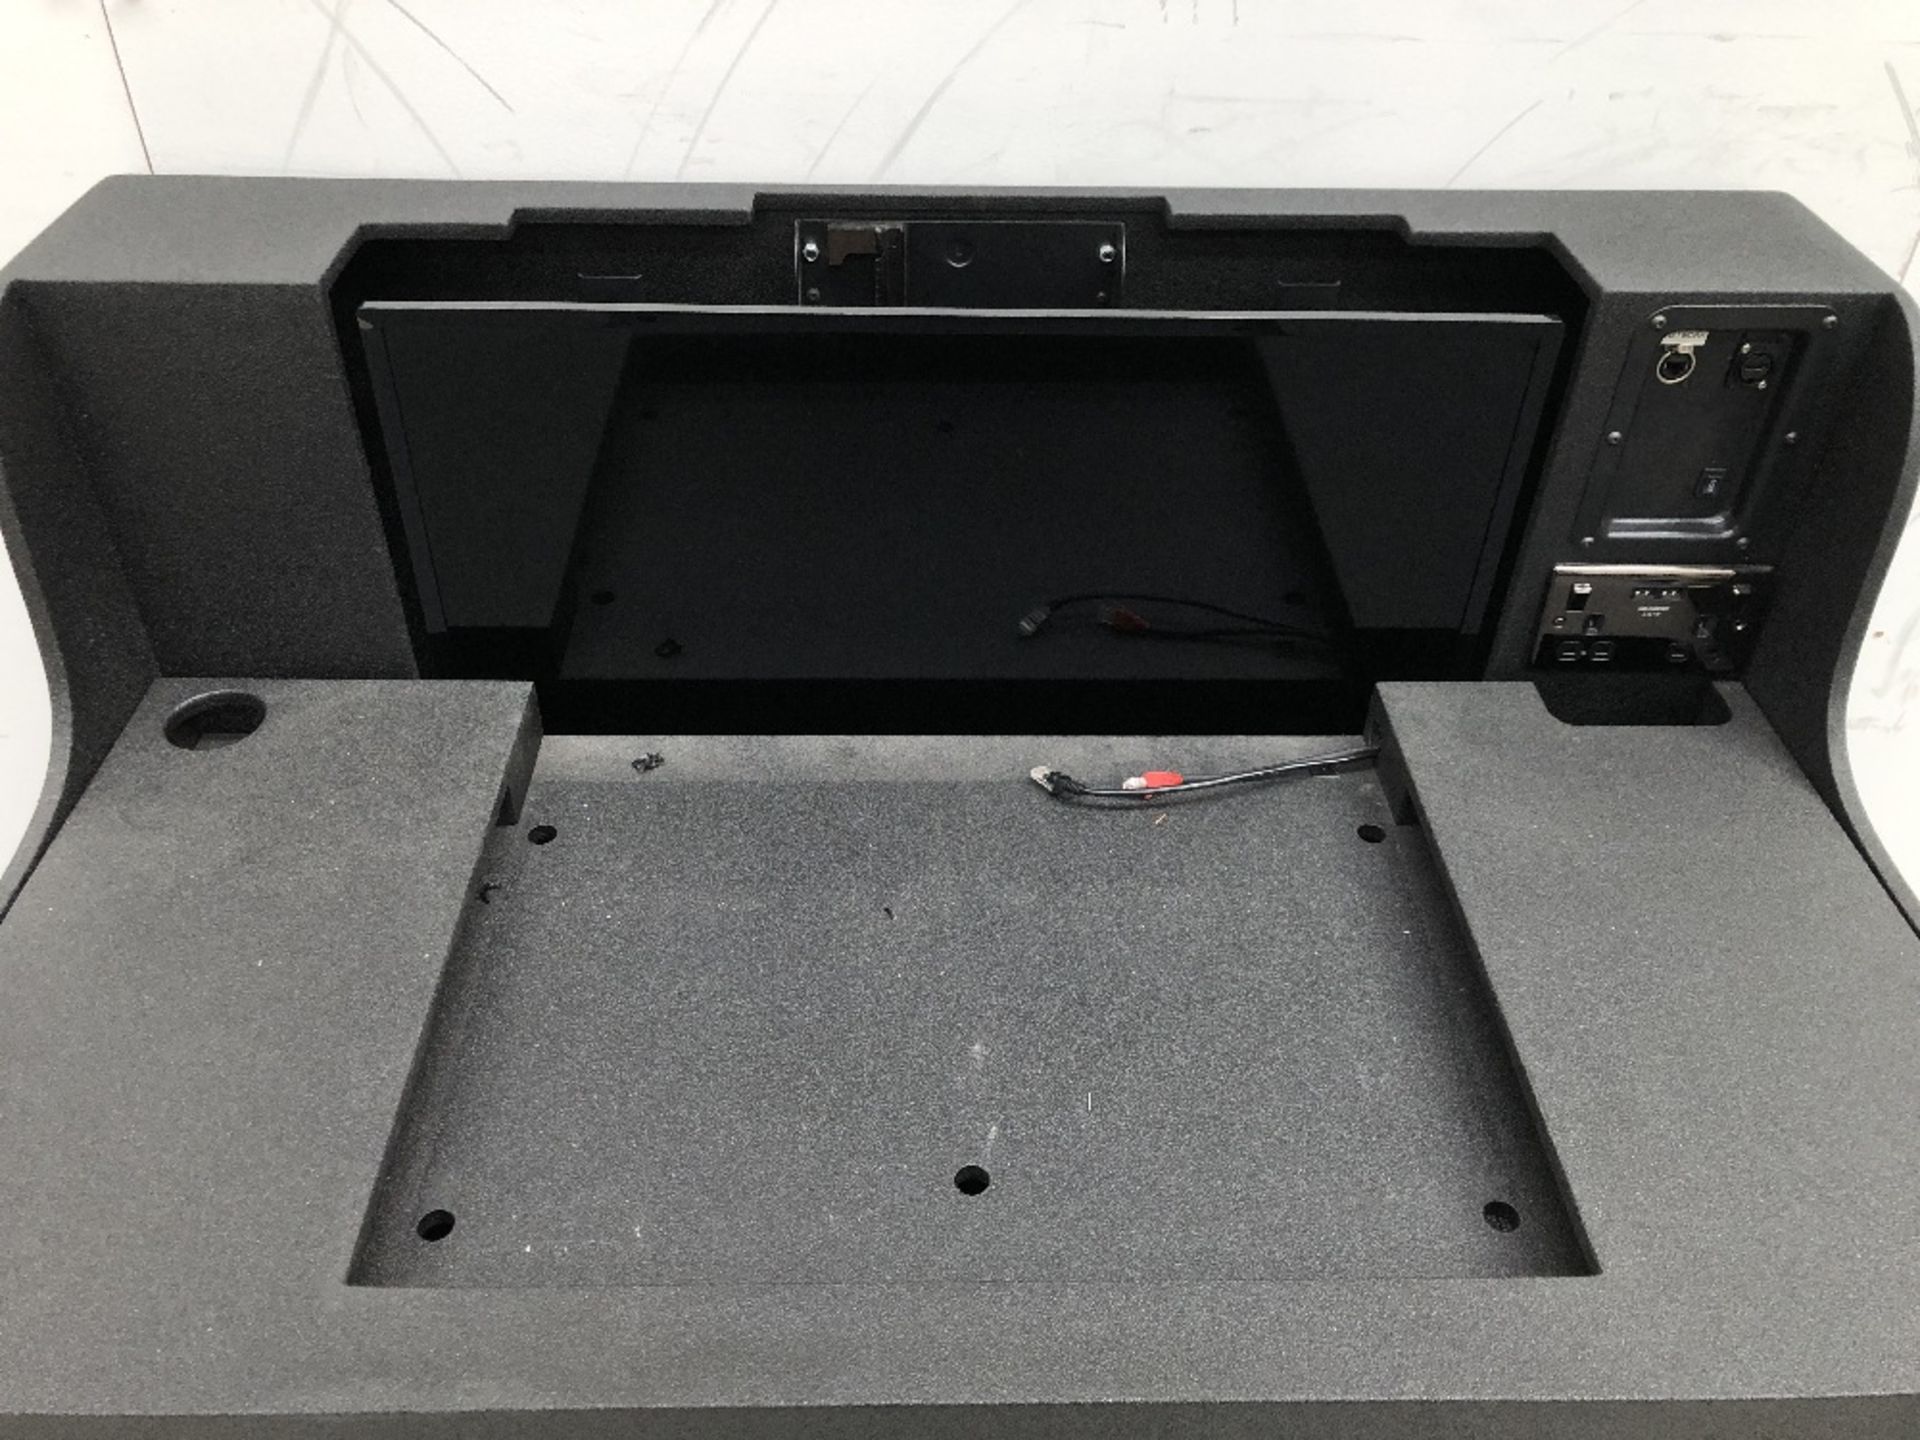 PPU Mobile Light Control Desk/Station With Flight case - Image 2 of 7